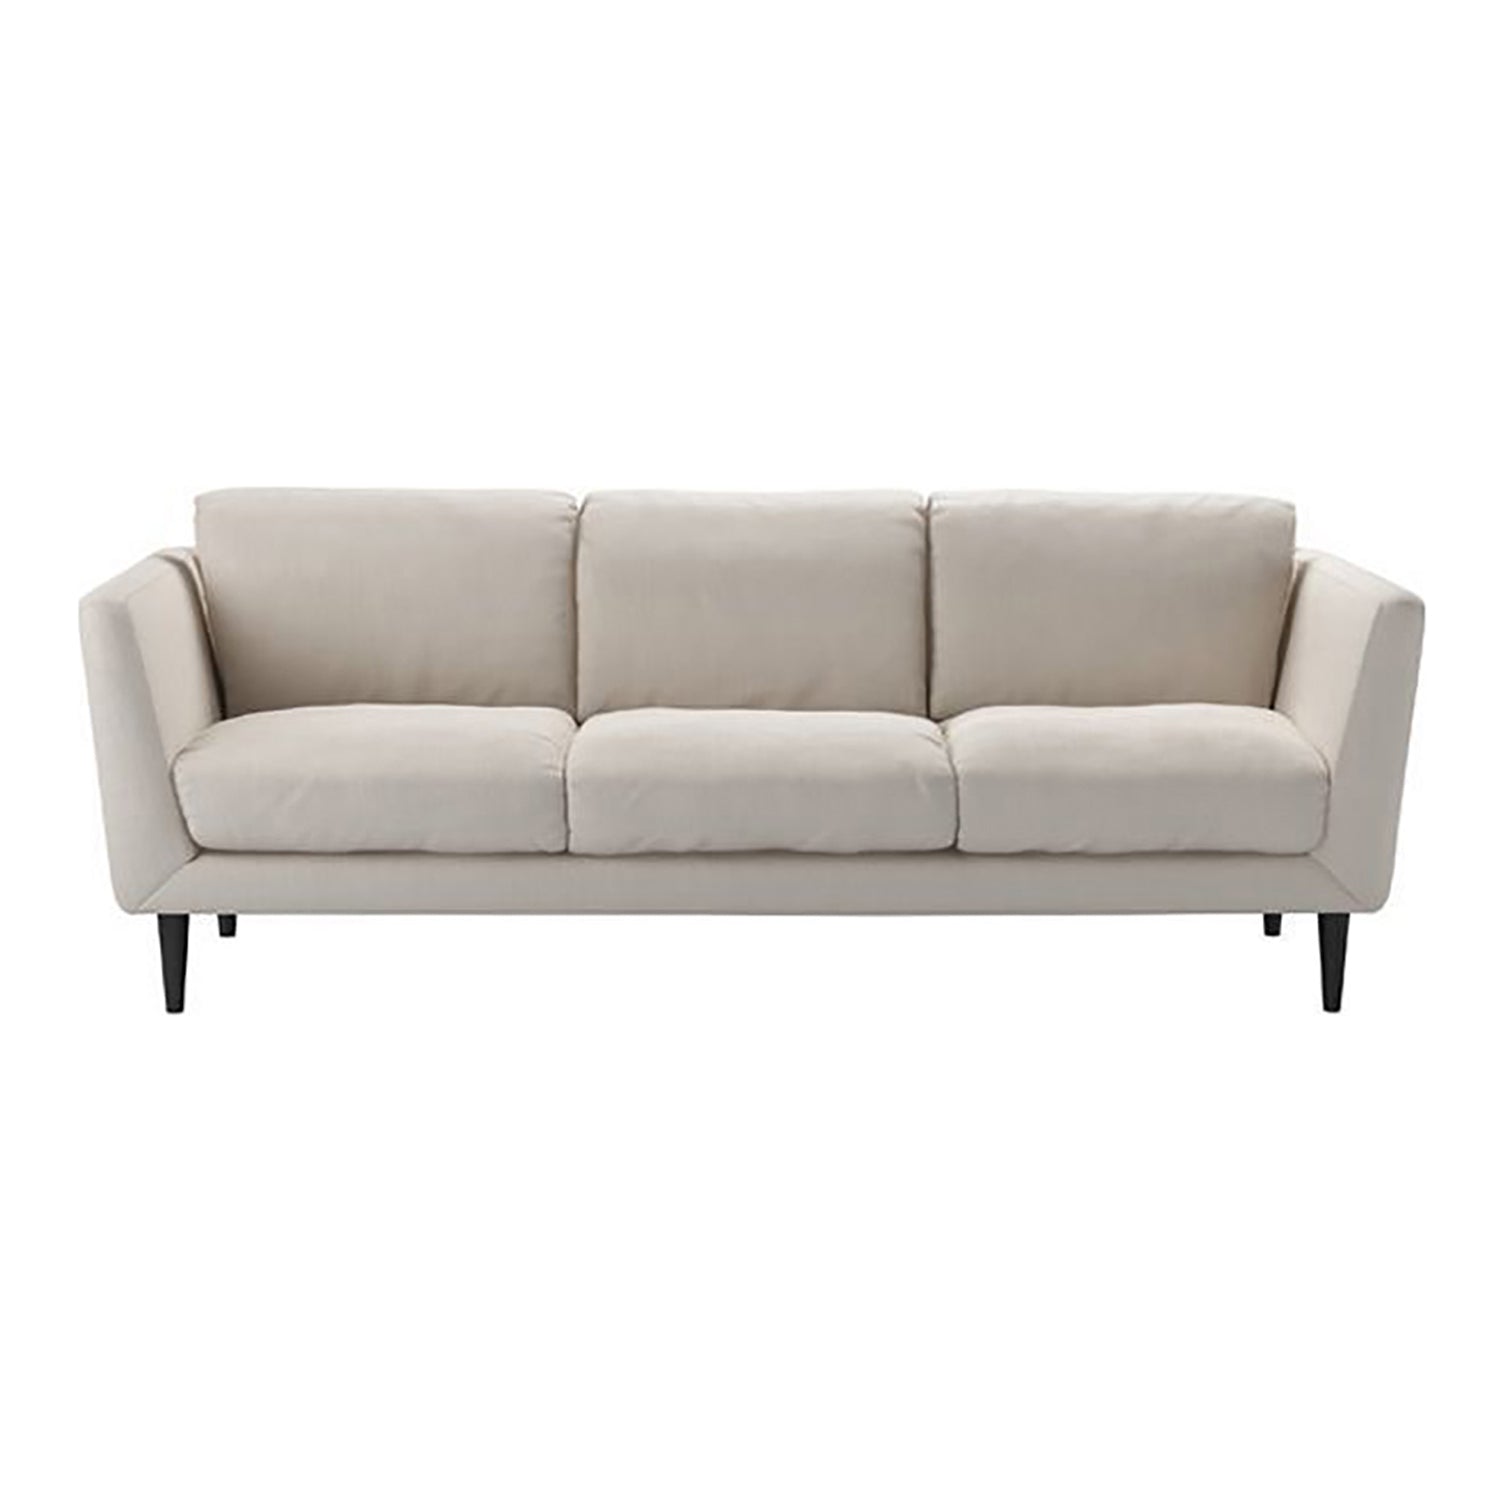 Holly Brushed Linen Cotton Sofa - 3 Seater